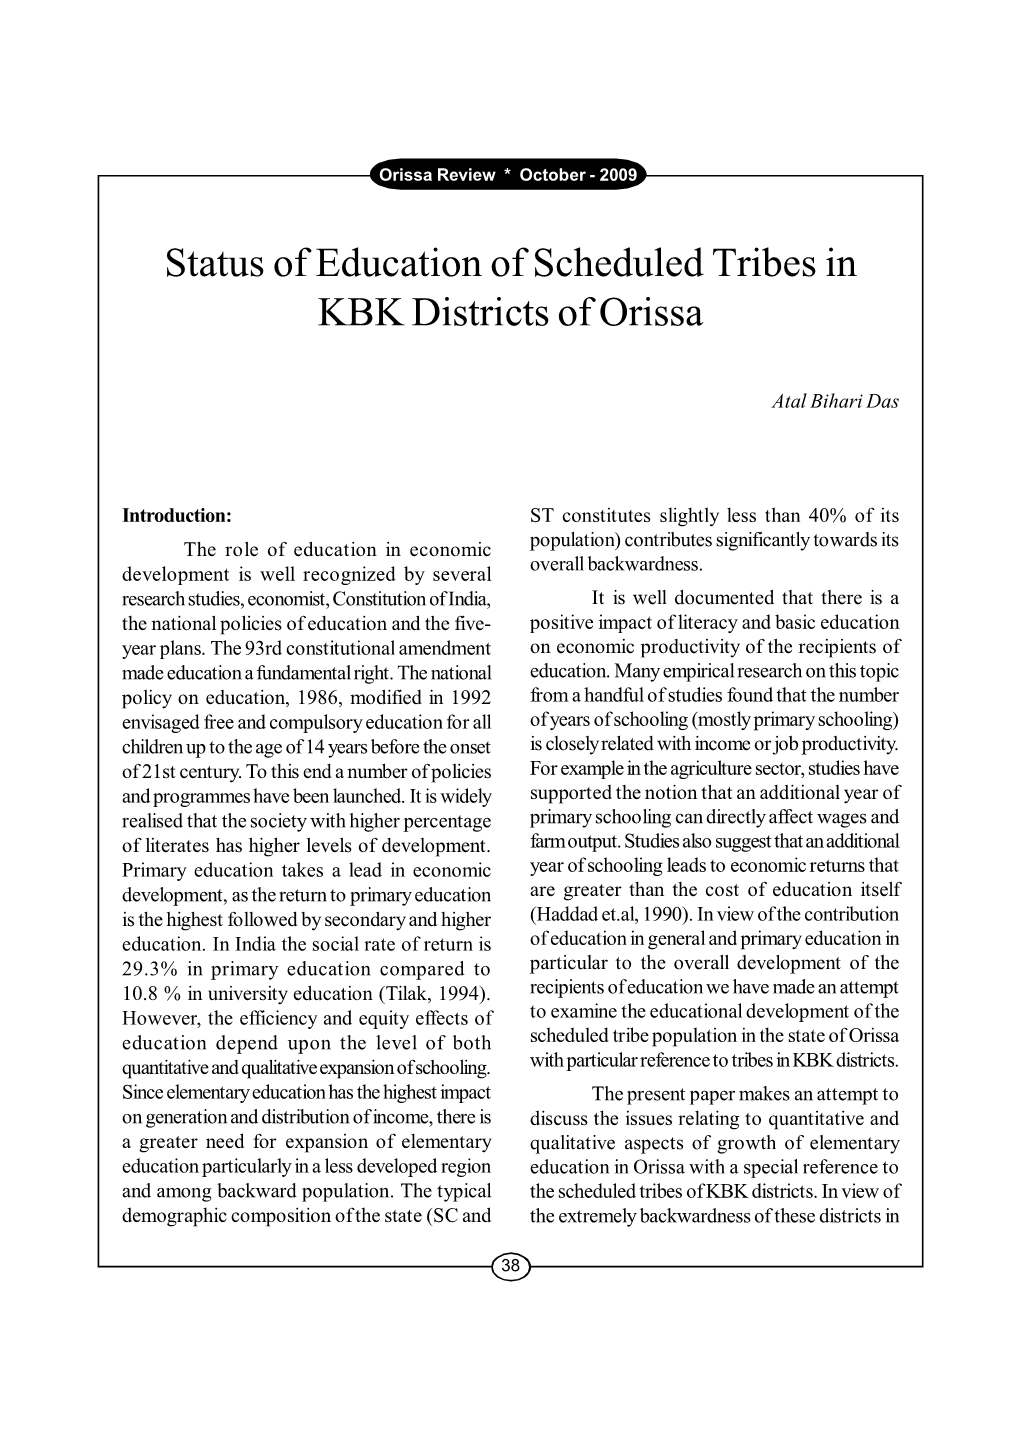 Status of Education of Scheduled Tribes in KBK Districts of Orissa